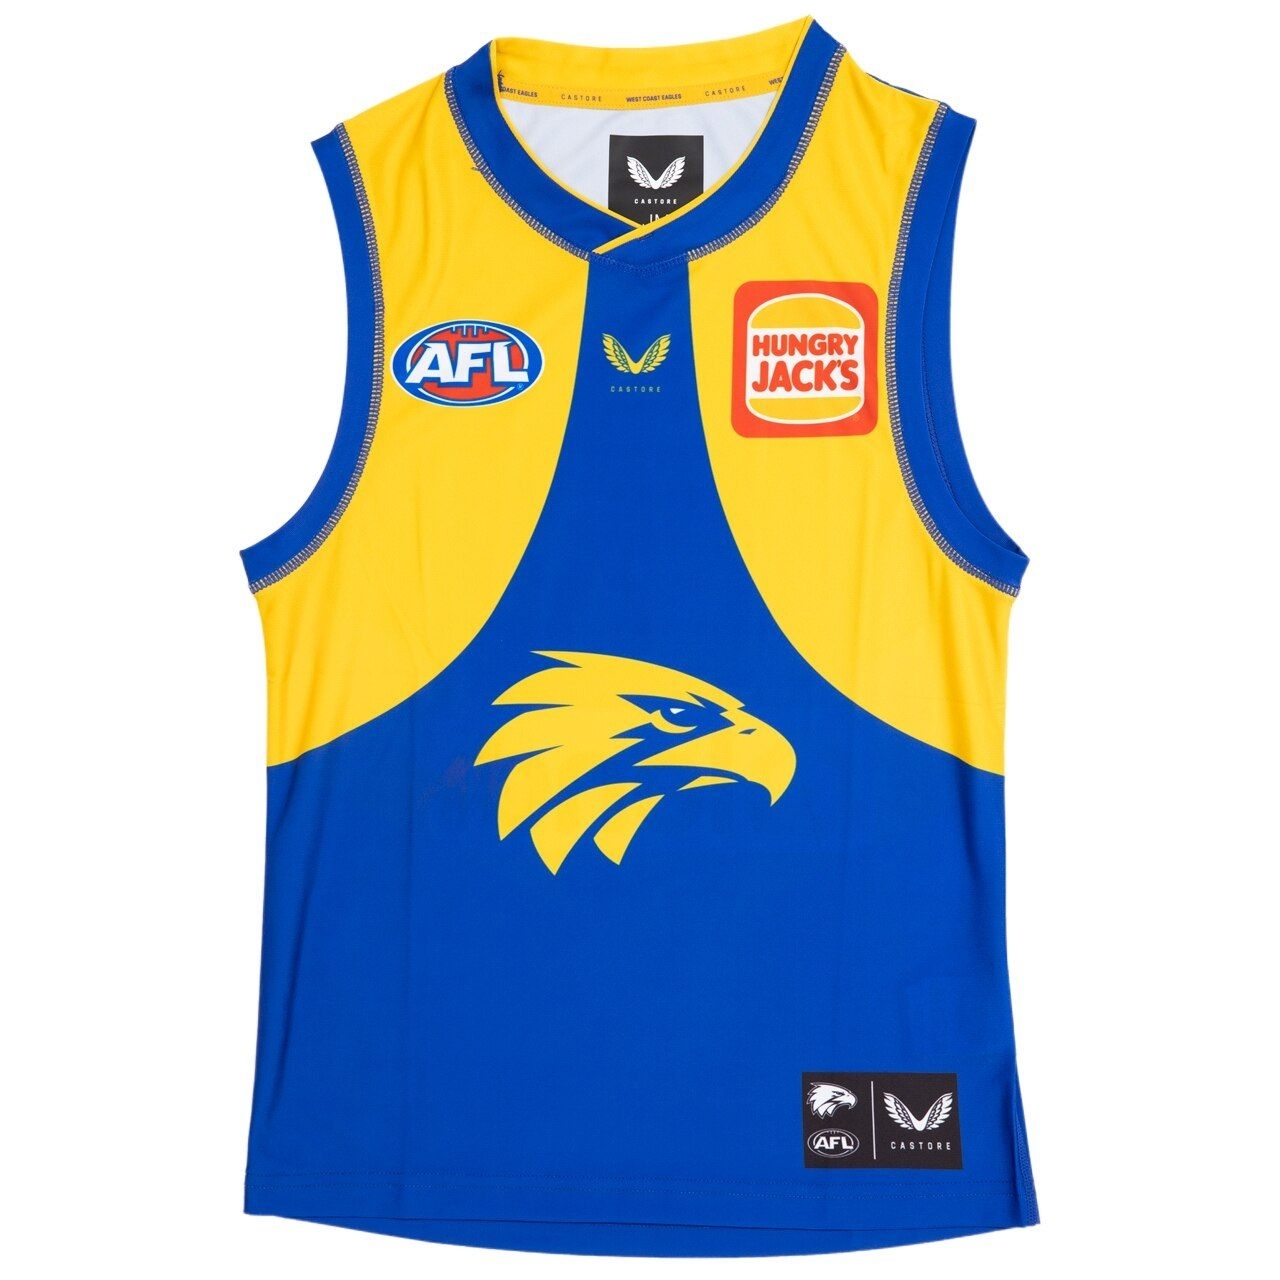 Womens & Kids Sizes AFL ISC 19 West Coast Eagles Home Guernsey Mens Small 4XL